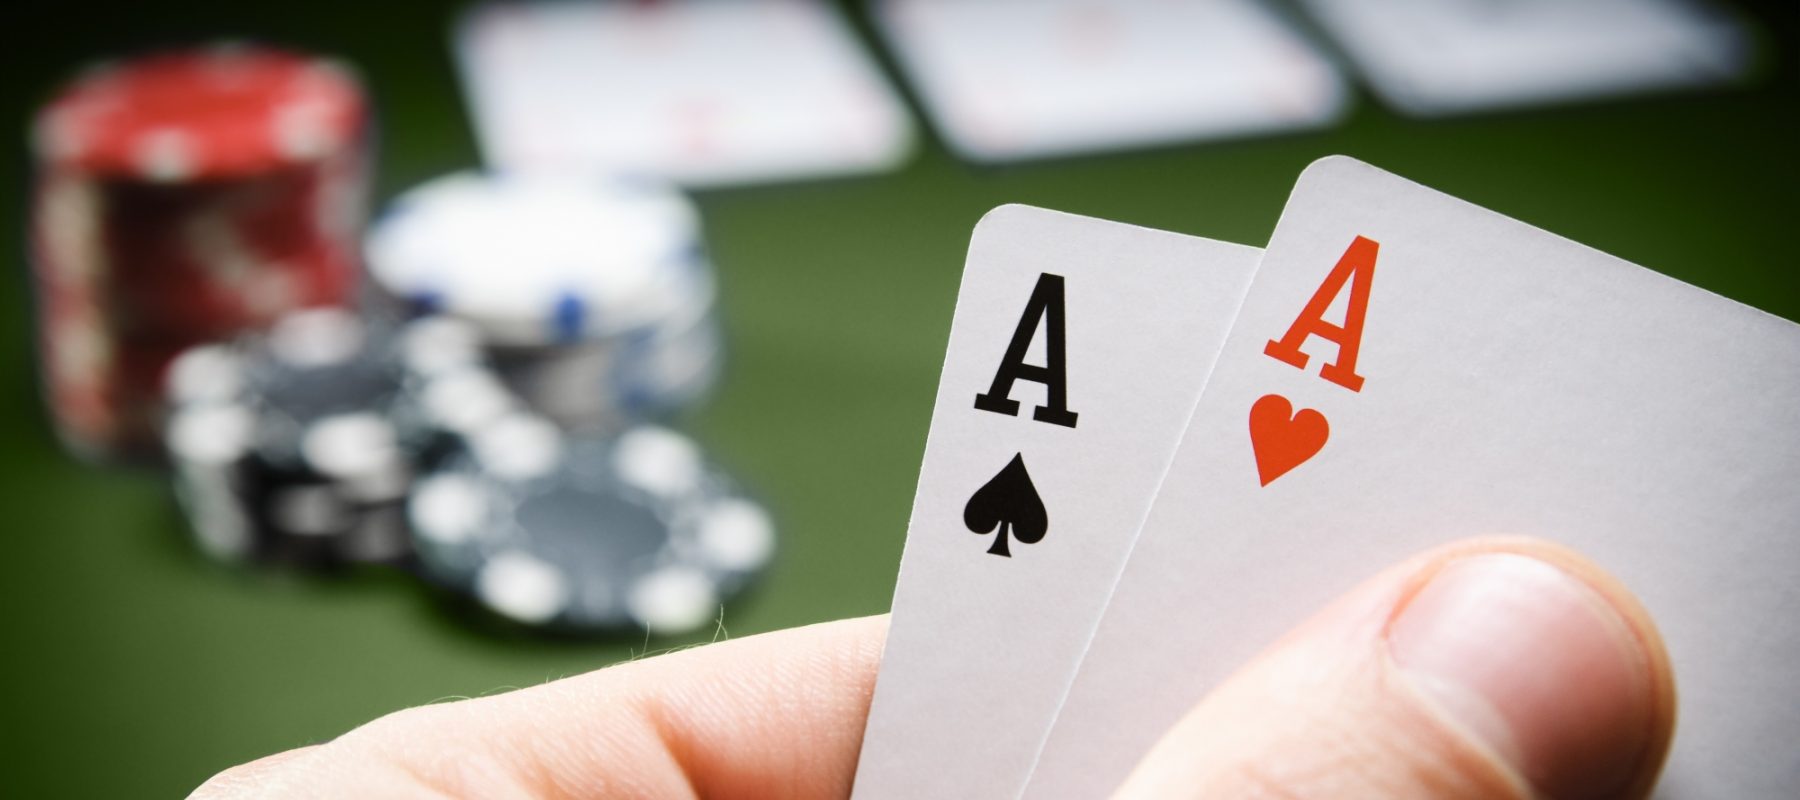 Make deposits for the games by using the deposit options carefully in online casinos.